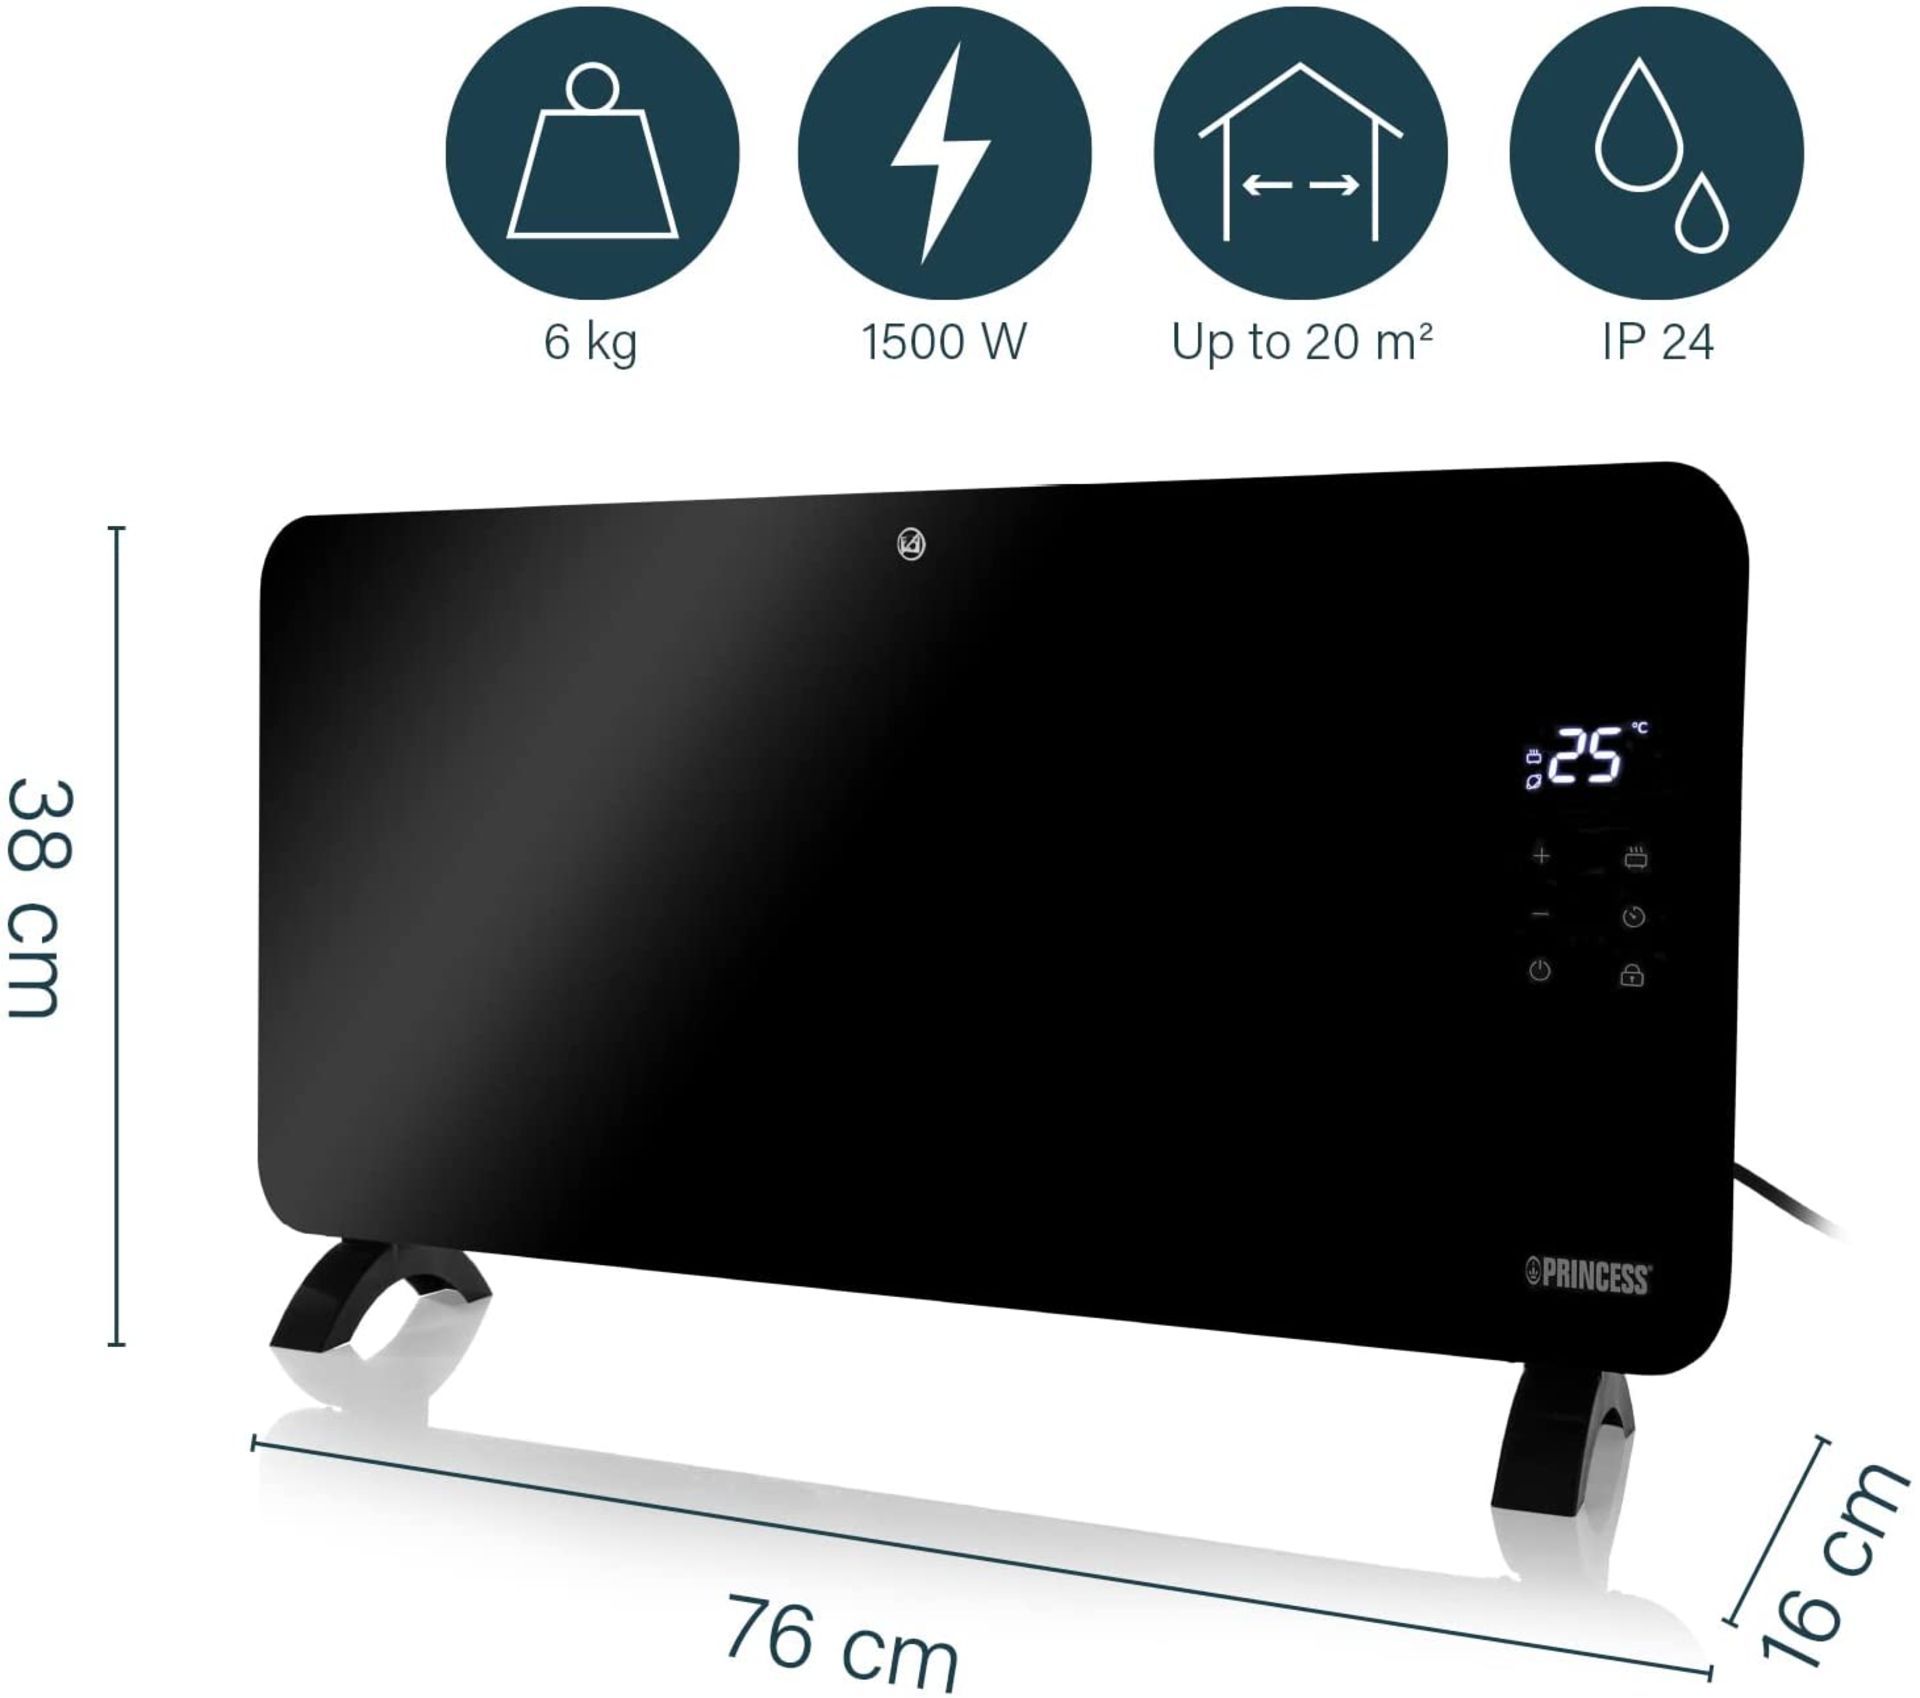 Princess Glass Smart Panel Heater, 1500 W, Black, Smart Control and App, Works with Alexa *NO VAT* - Image 2 of 8